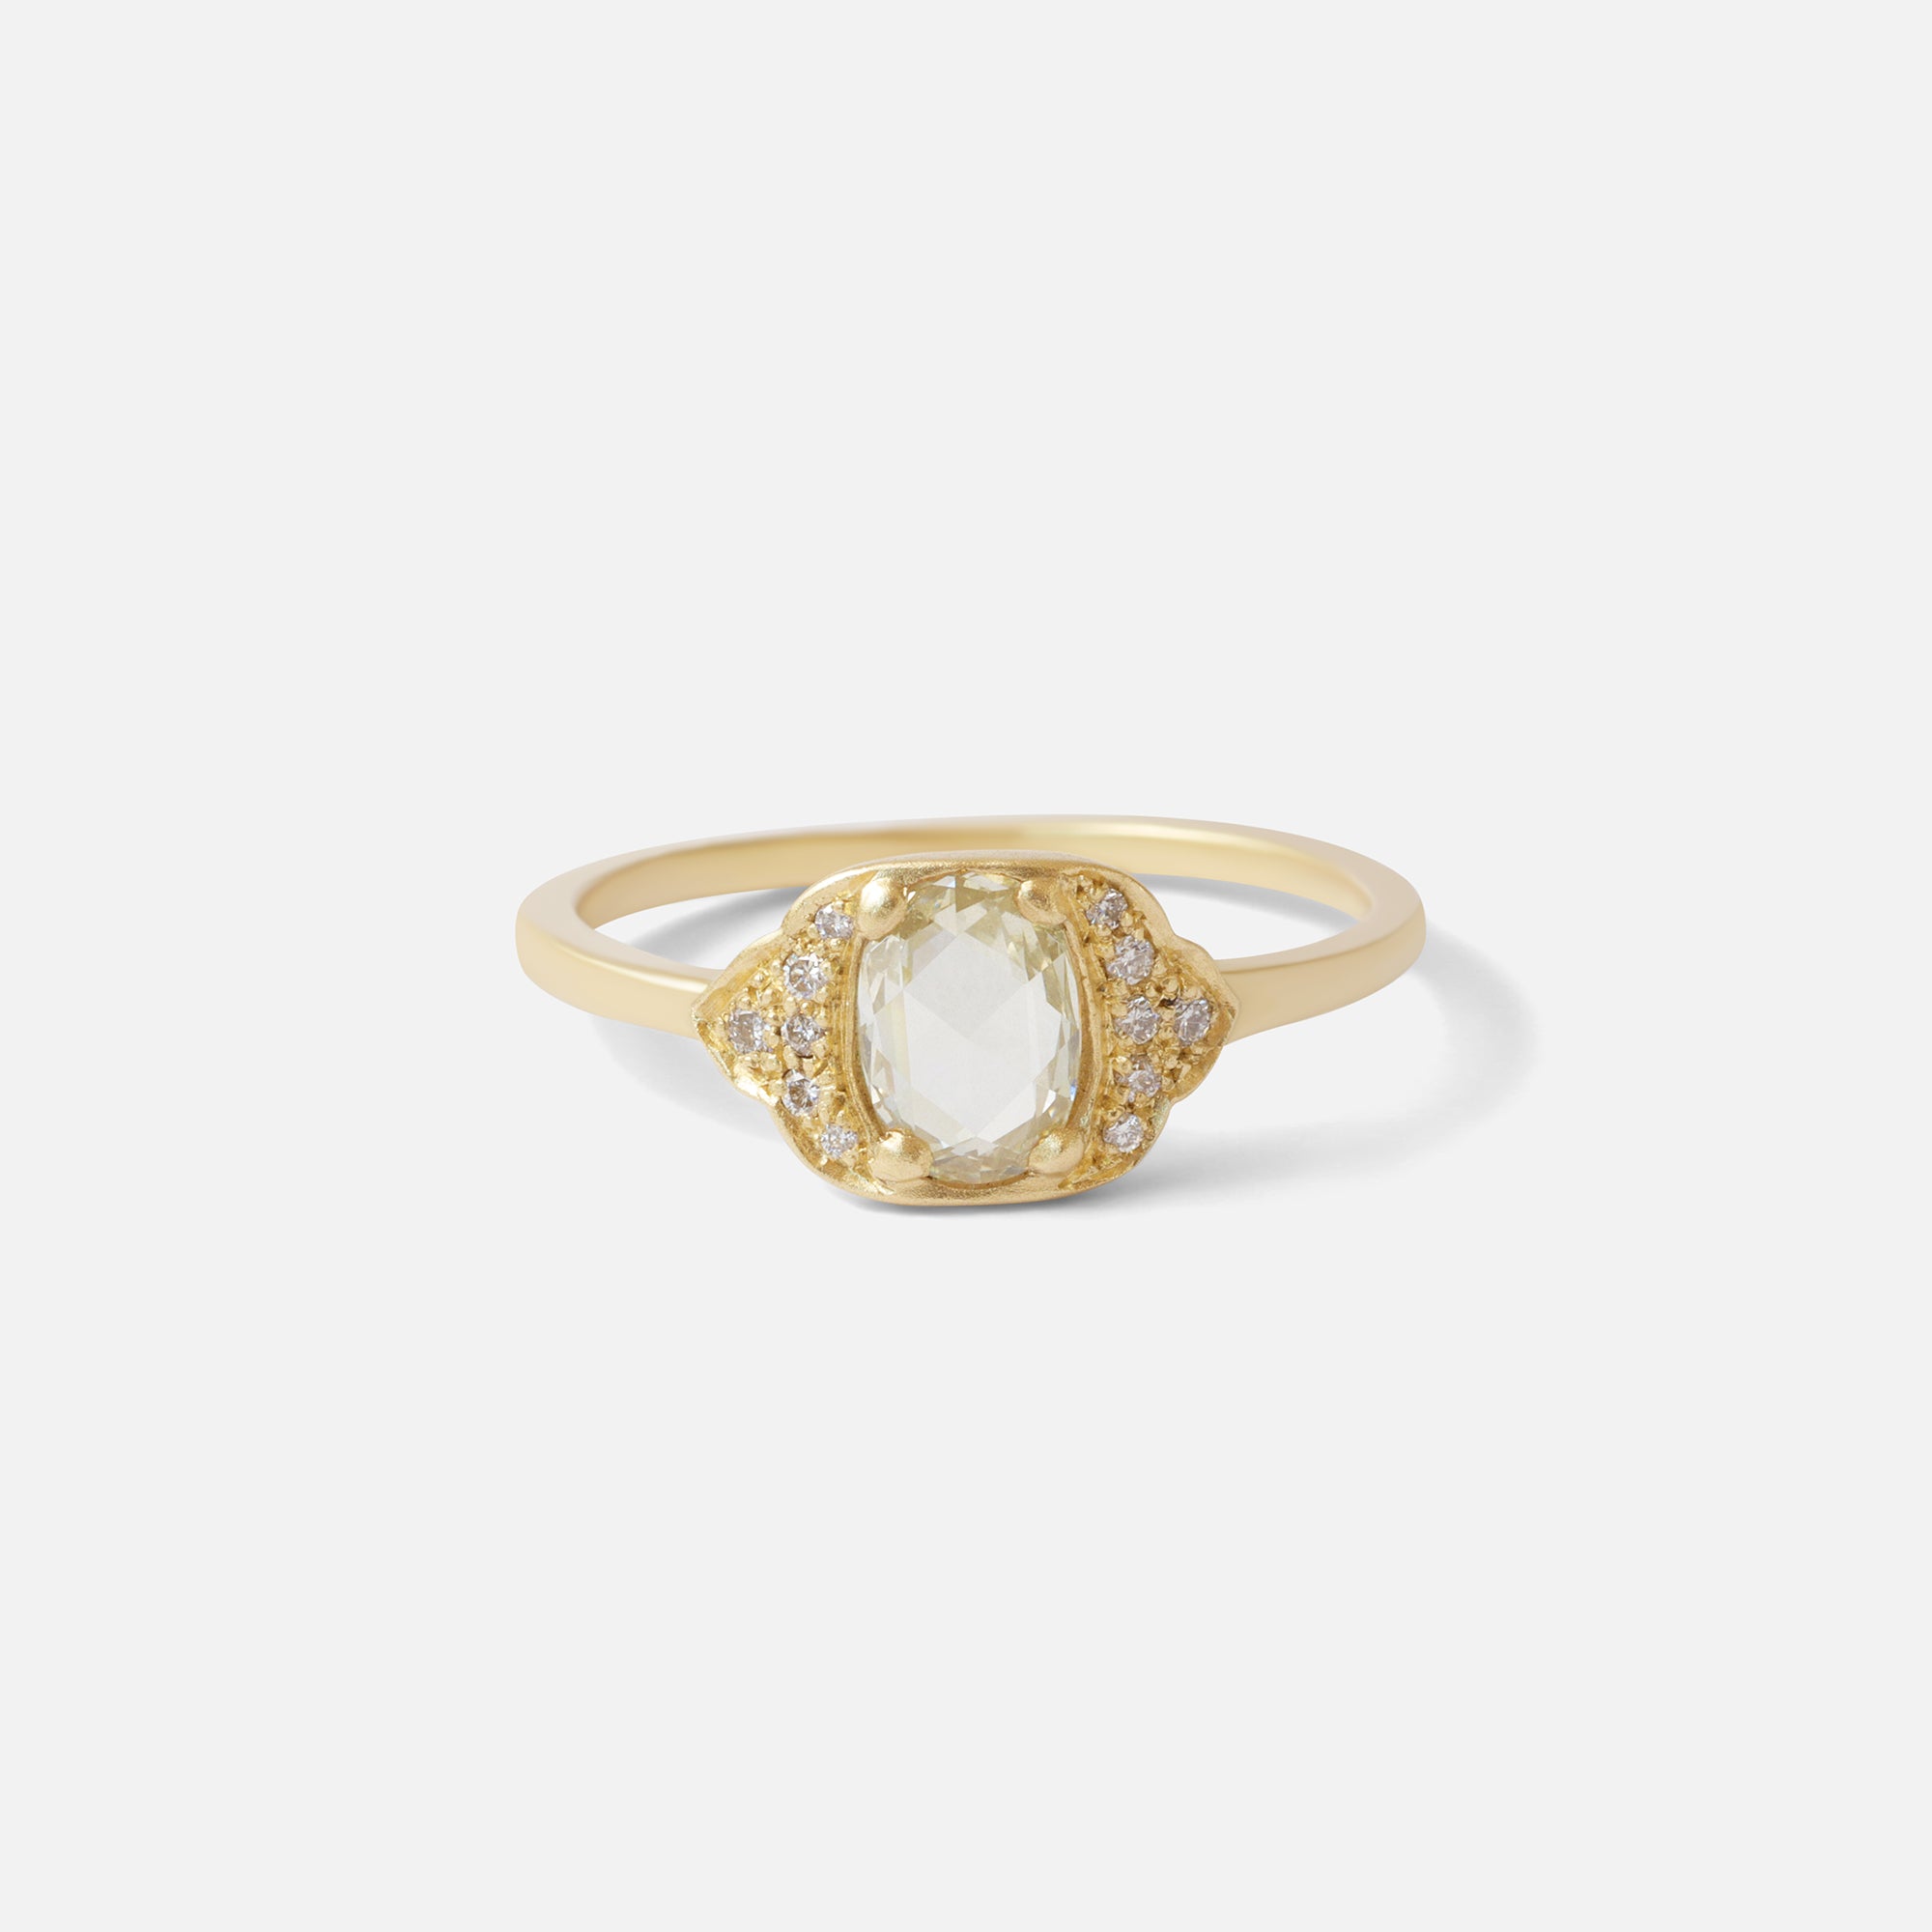 Zorahaid Ring By Hiroyo in Engagement Rings Category